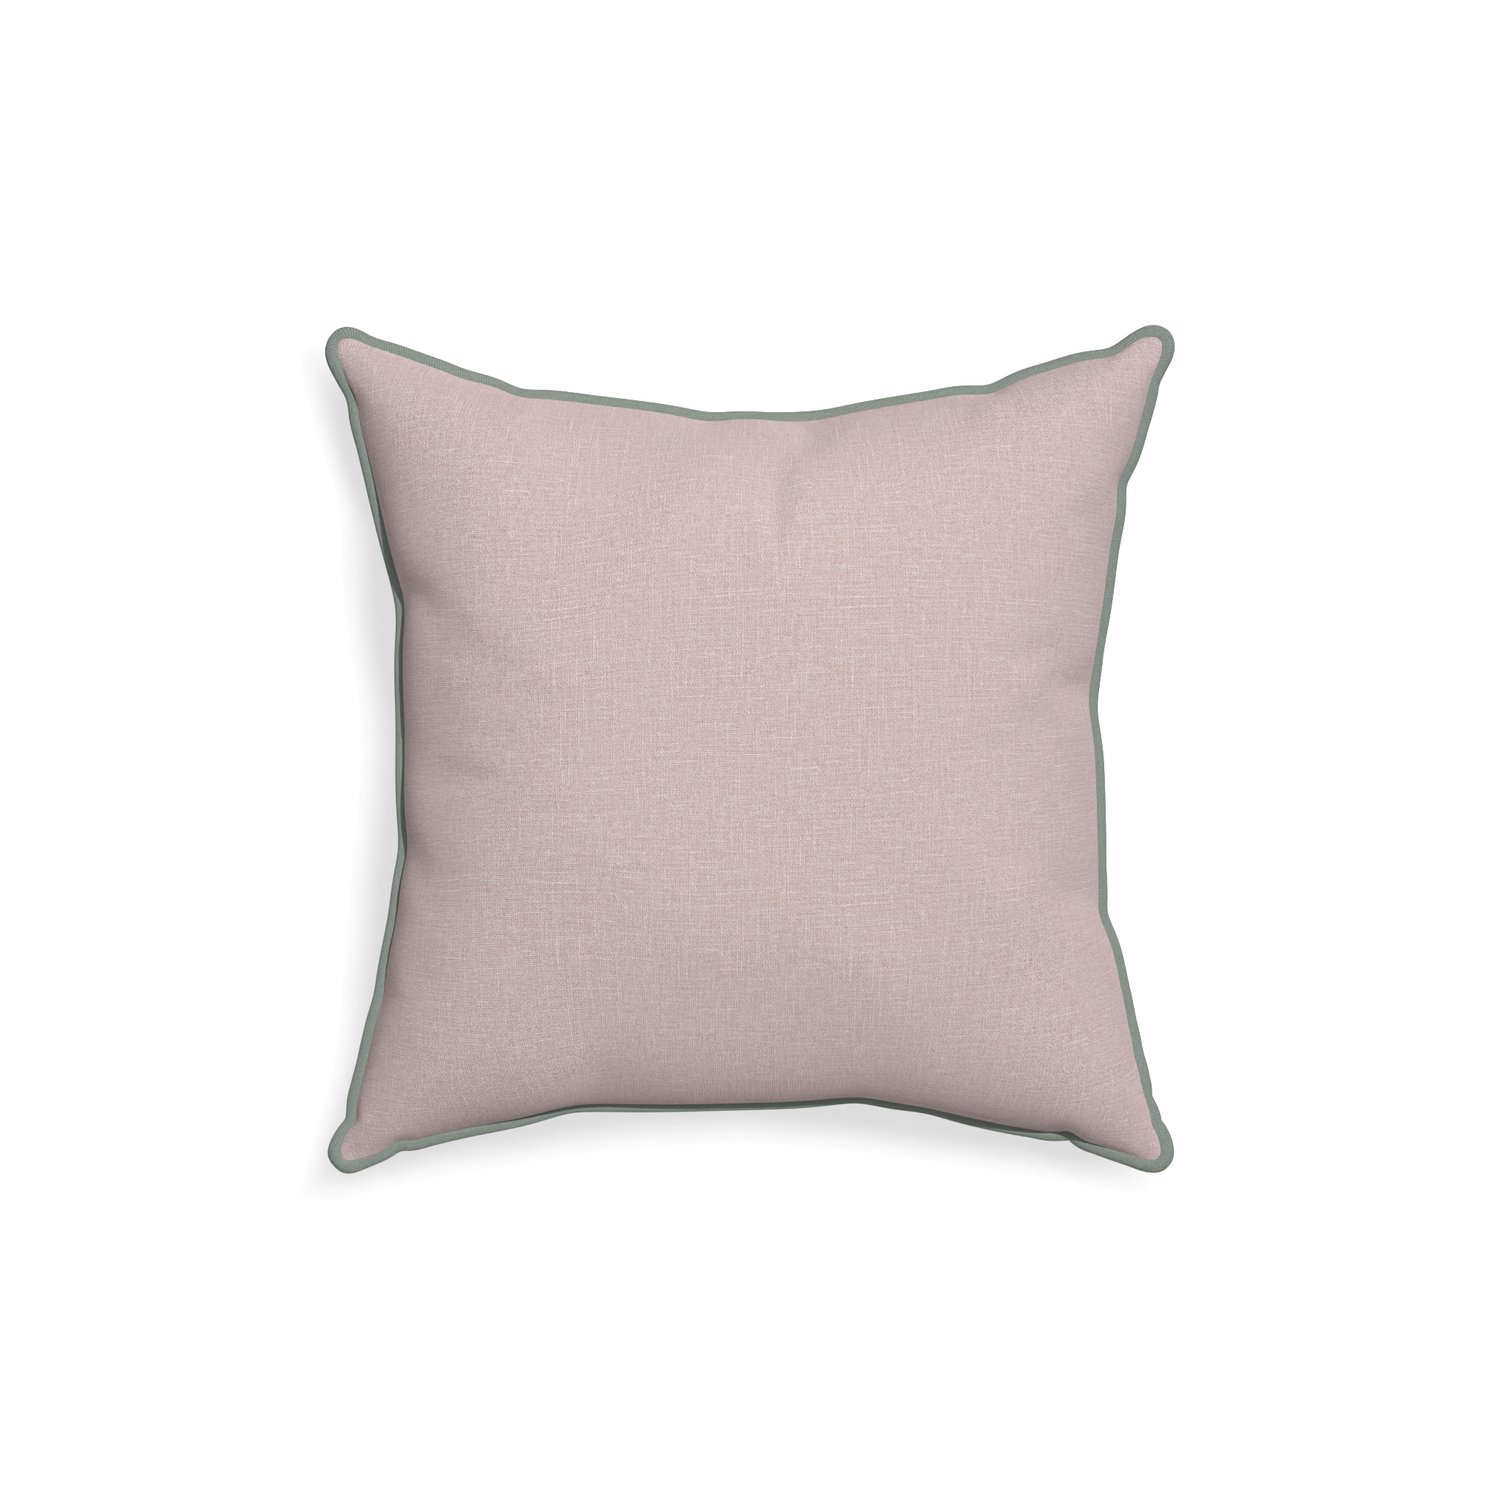 18-square orchid custom mauve pinkpillow with sage piping on white background